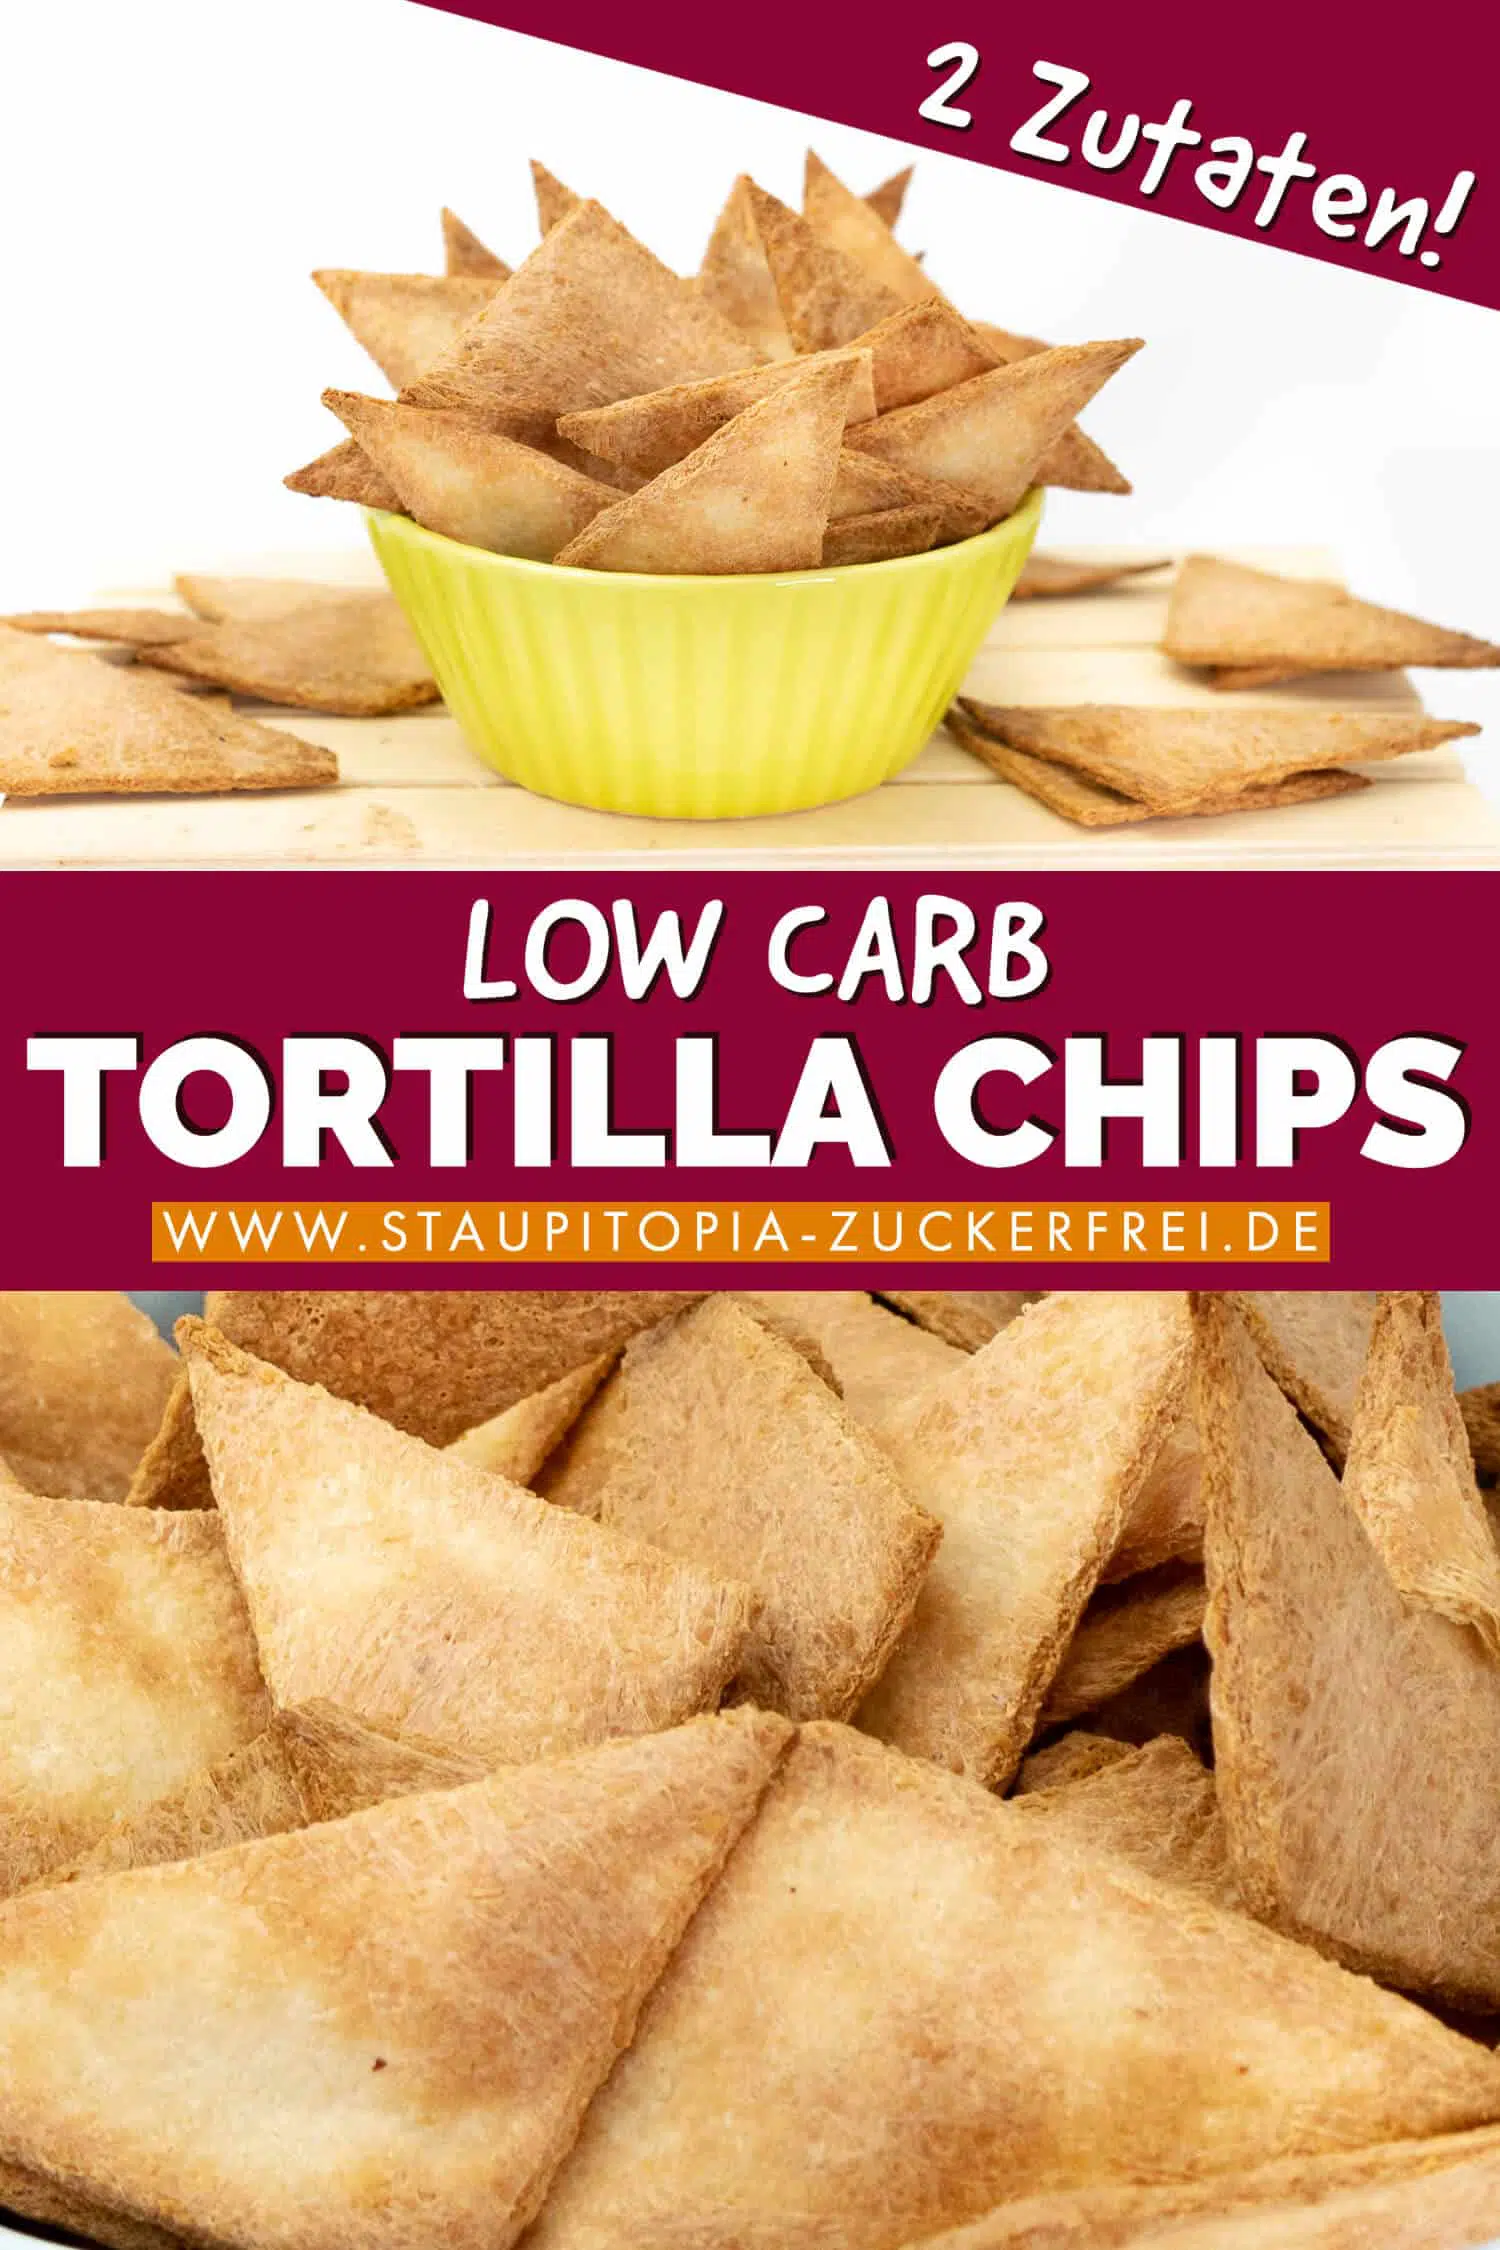 Low Carb Tortilla Chips selbst machen